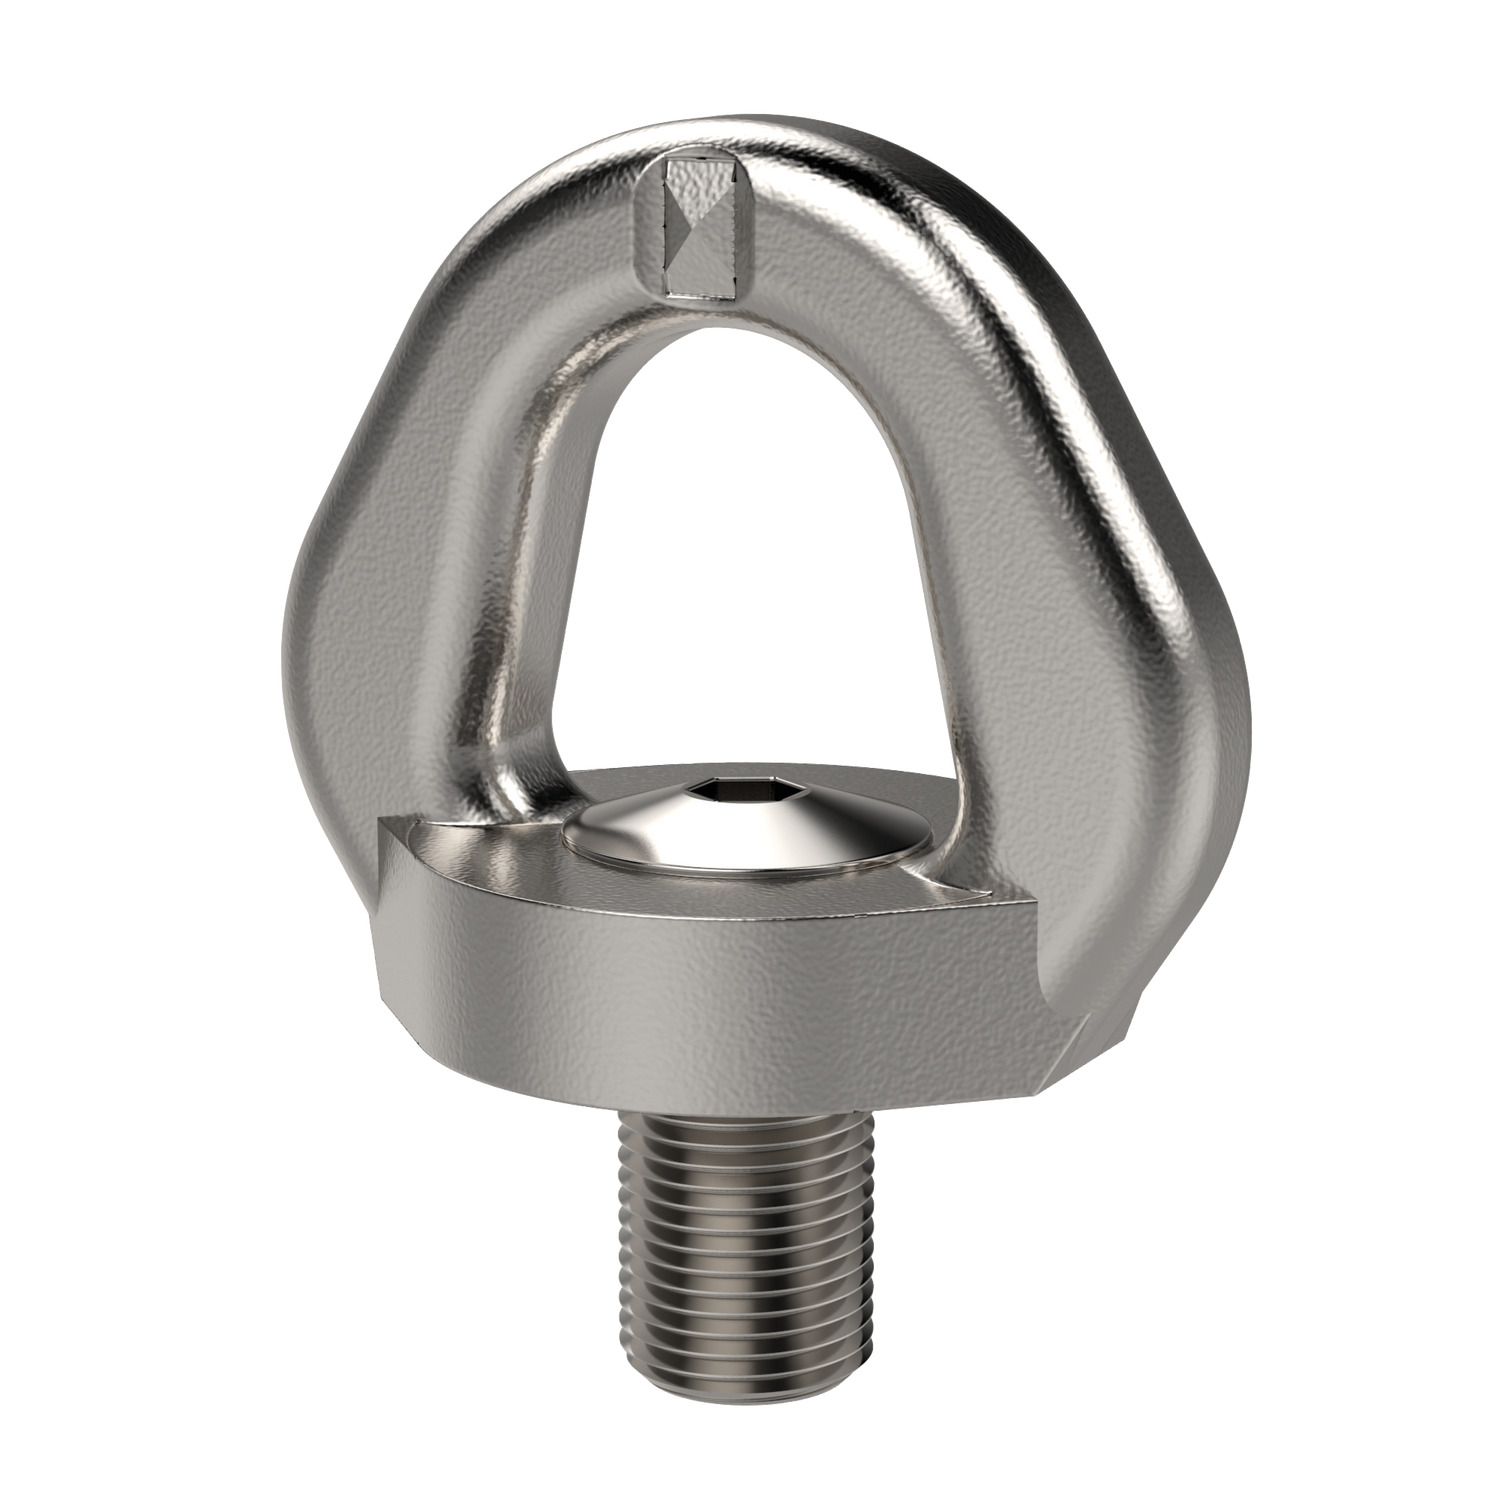 Swivel Eye Bolts Male Male swivel eye bolts made from stainless steel 316L, supplied with CE certificate. Full 360° articulation and low overhang for improved safety.